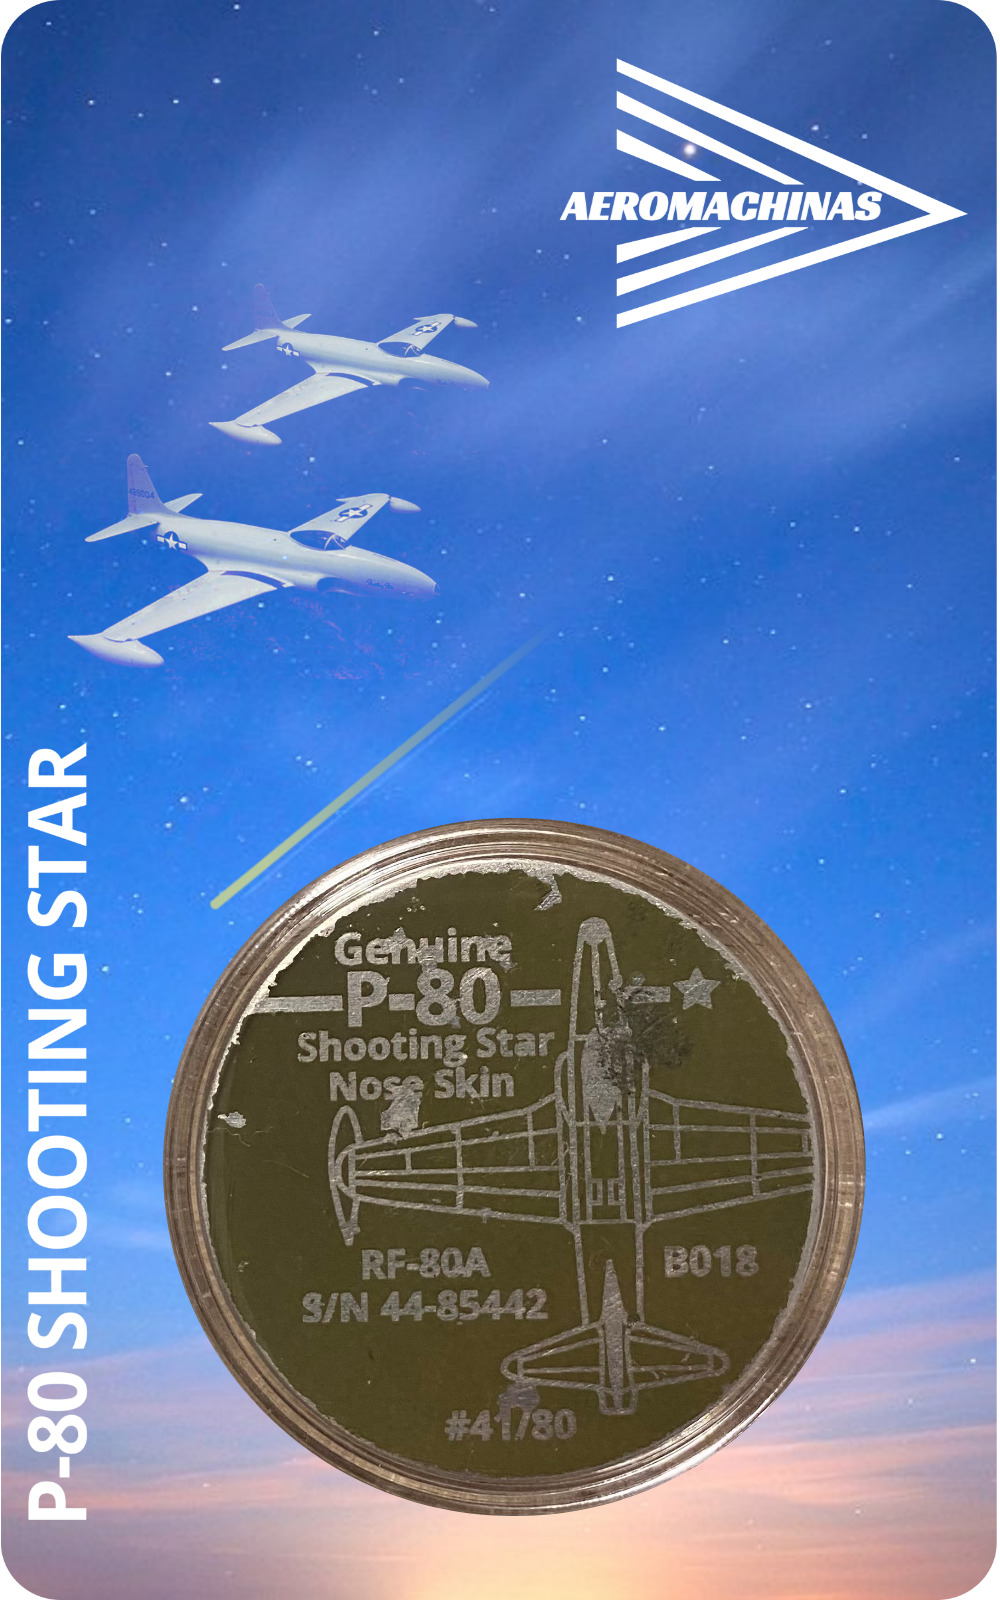 P-80 Shooting Star S/N 44-85442 Nose Skin Challenge Coin